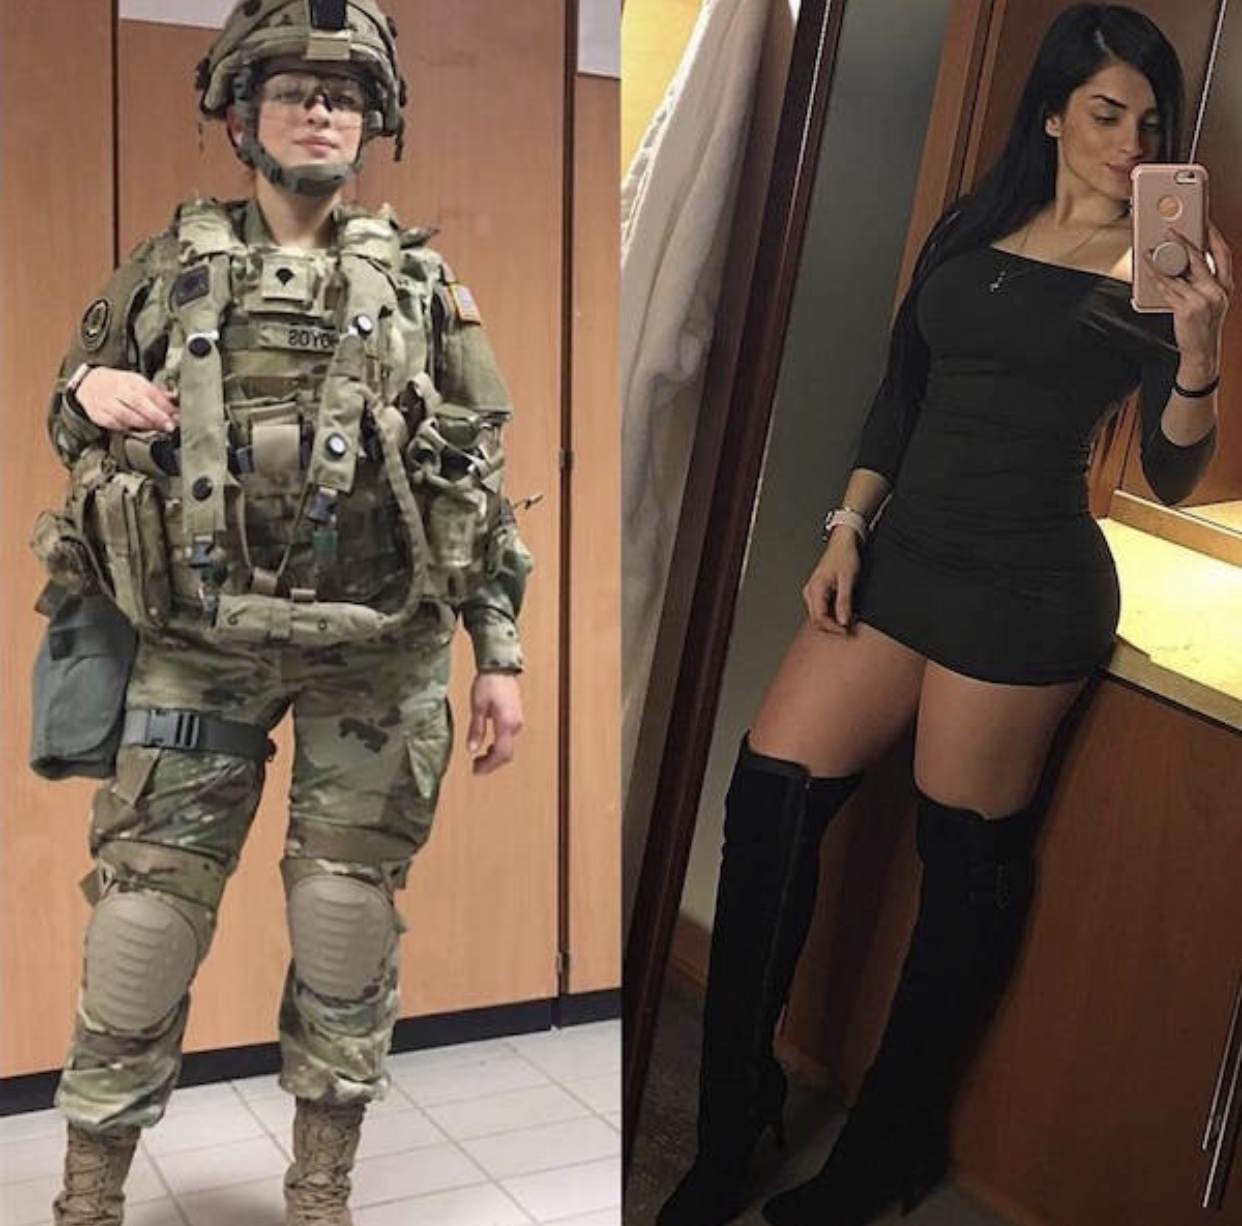 Hot military babe in full gear and a her taking a selfie wearing a very short dress and tall boots